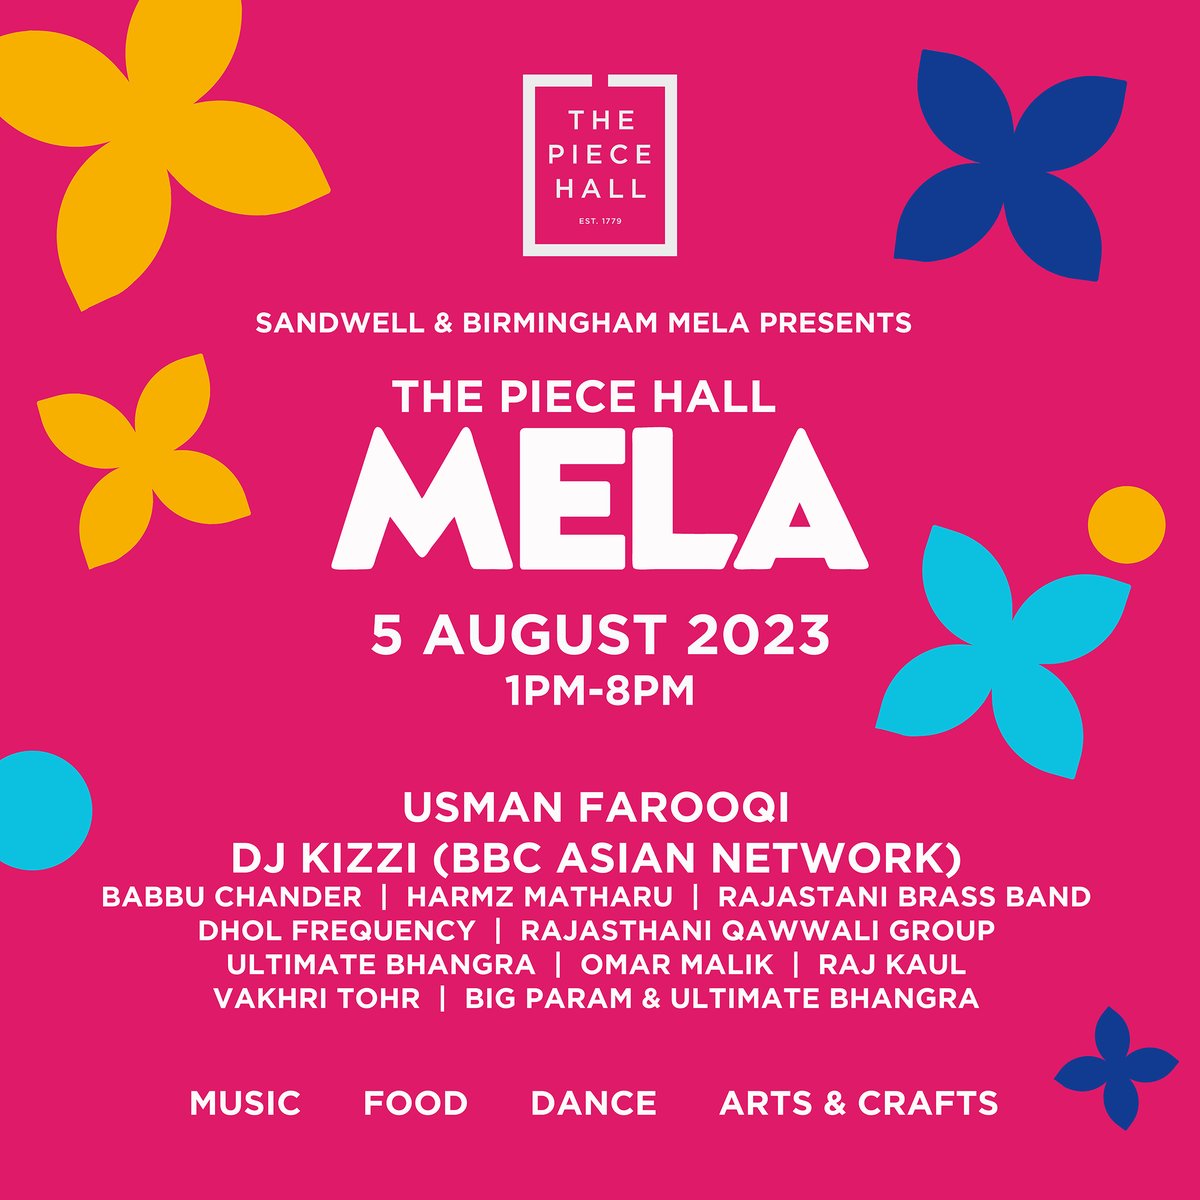 The Piece Hall Mela is back on Saturday 5 August with headliner Usman Farooqi! This FREE event by the team from @BirminghamMela also features a DJ set from rising Asian Network star @DjKizzi Tell your friends and family! More details on the website thepiecehall.co.uk/culture/